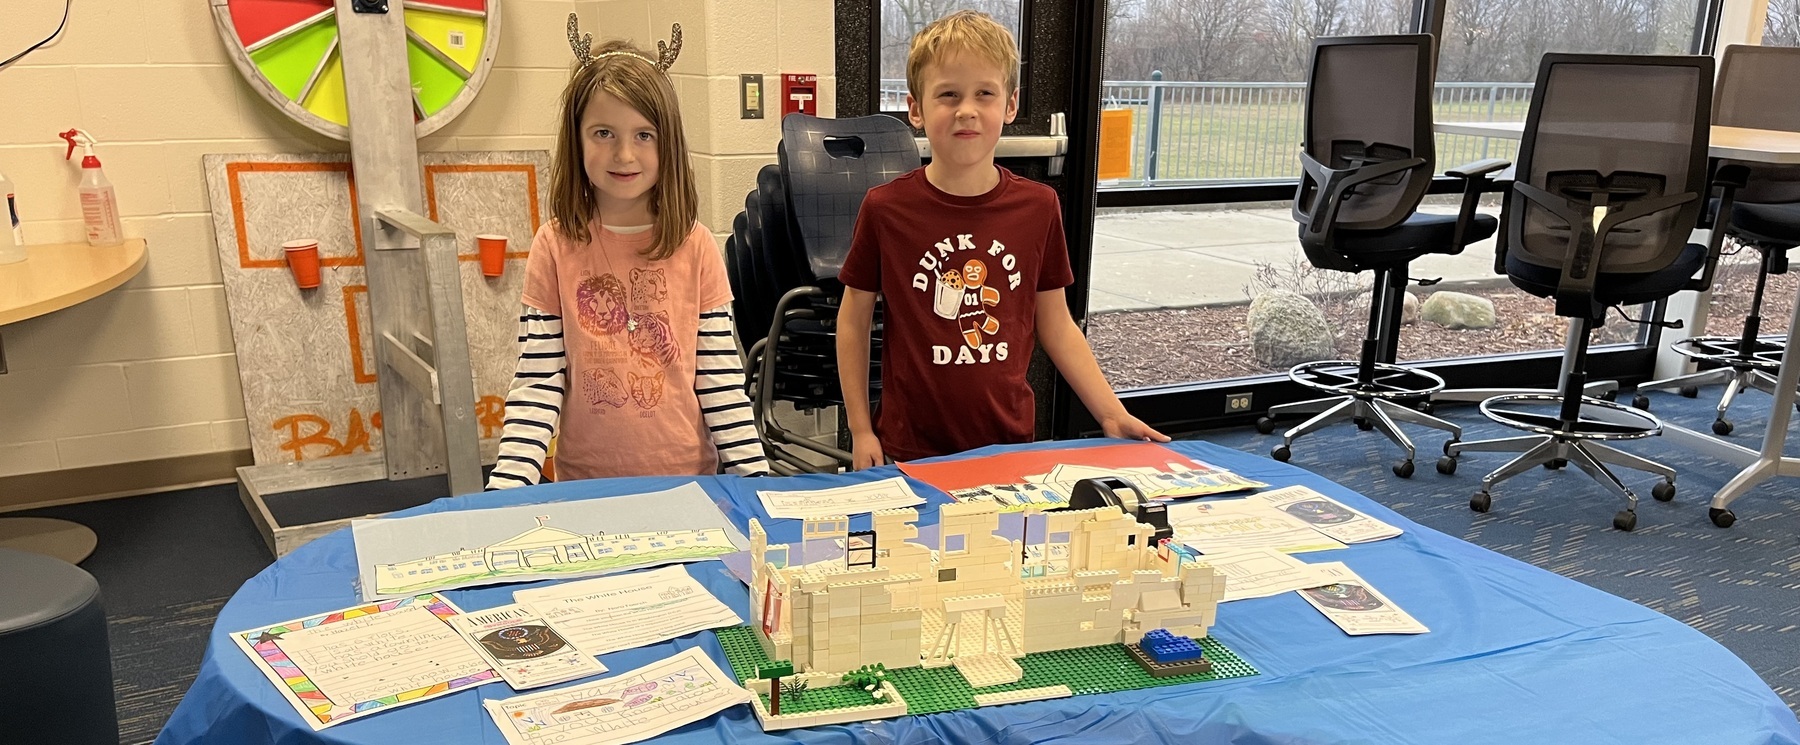 A male and female 1st grade student pose in front of a model of the White House made out of Lego.